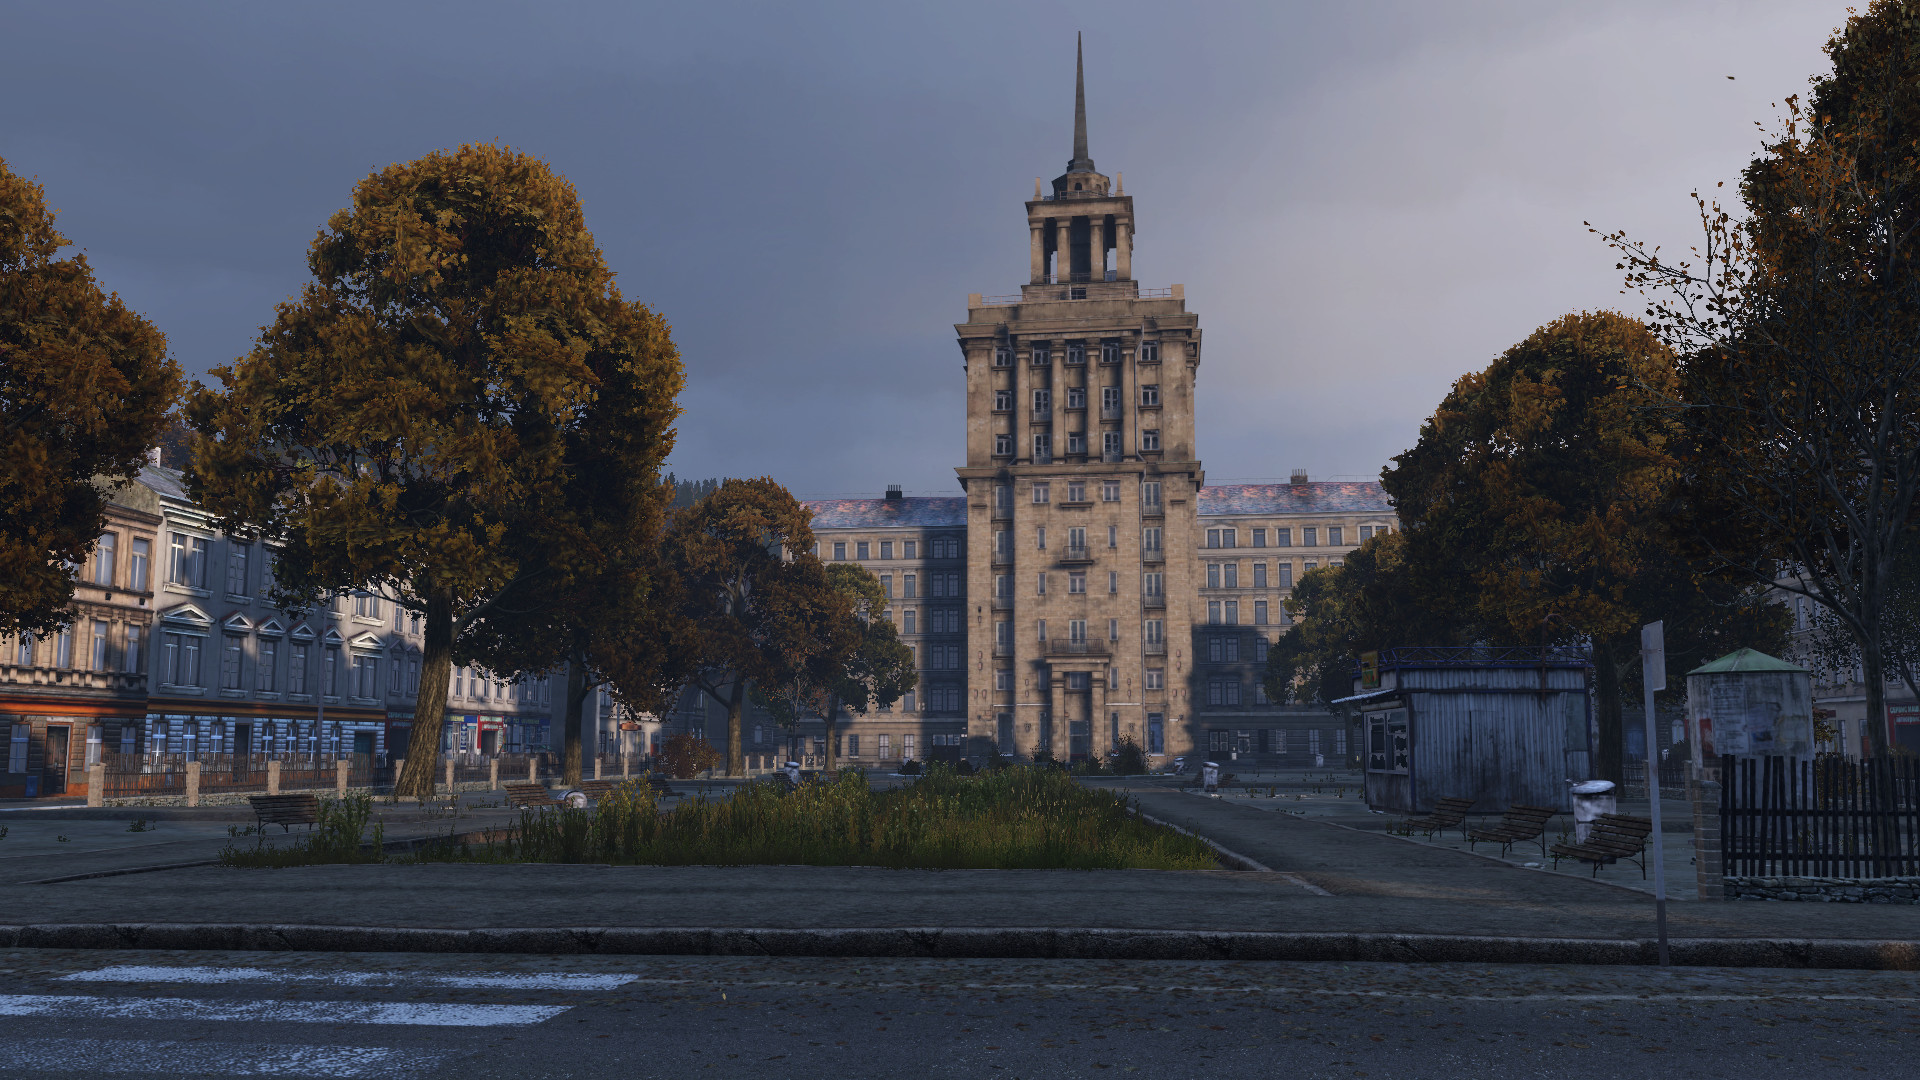 DayZ 2 may be in development at Bohemia, according to internal Microsoft  documents - Neowin